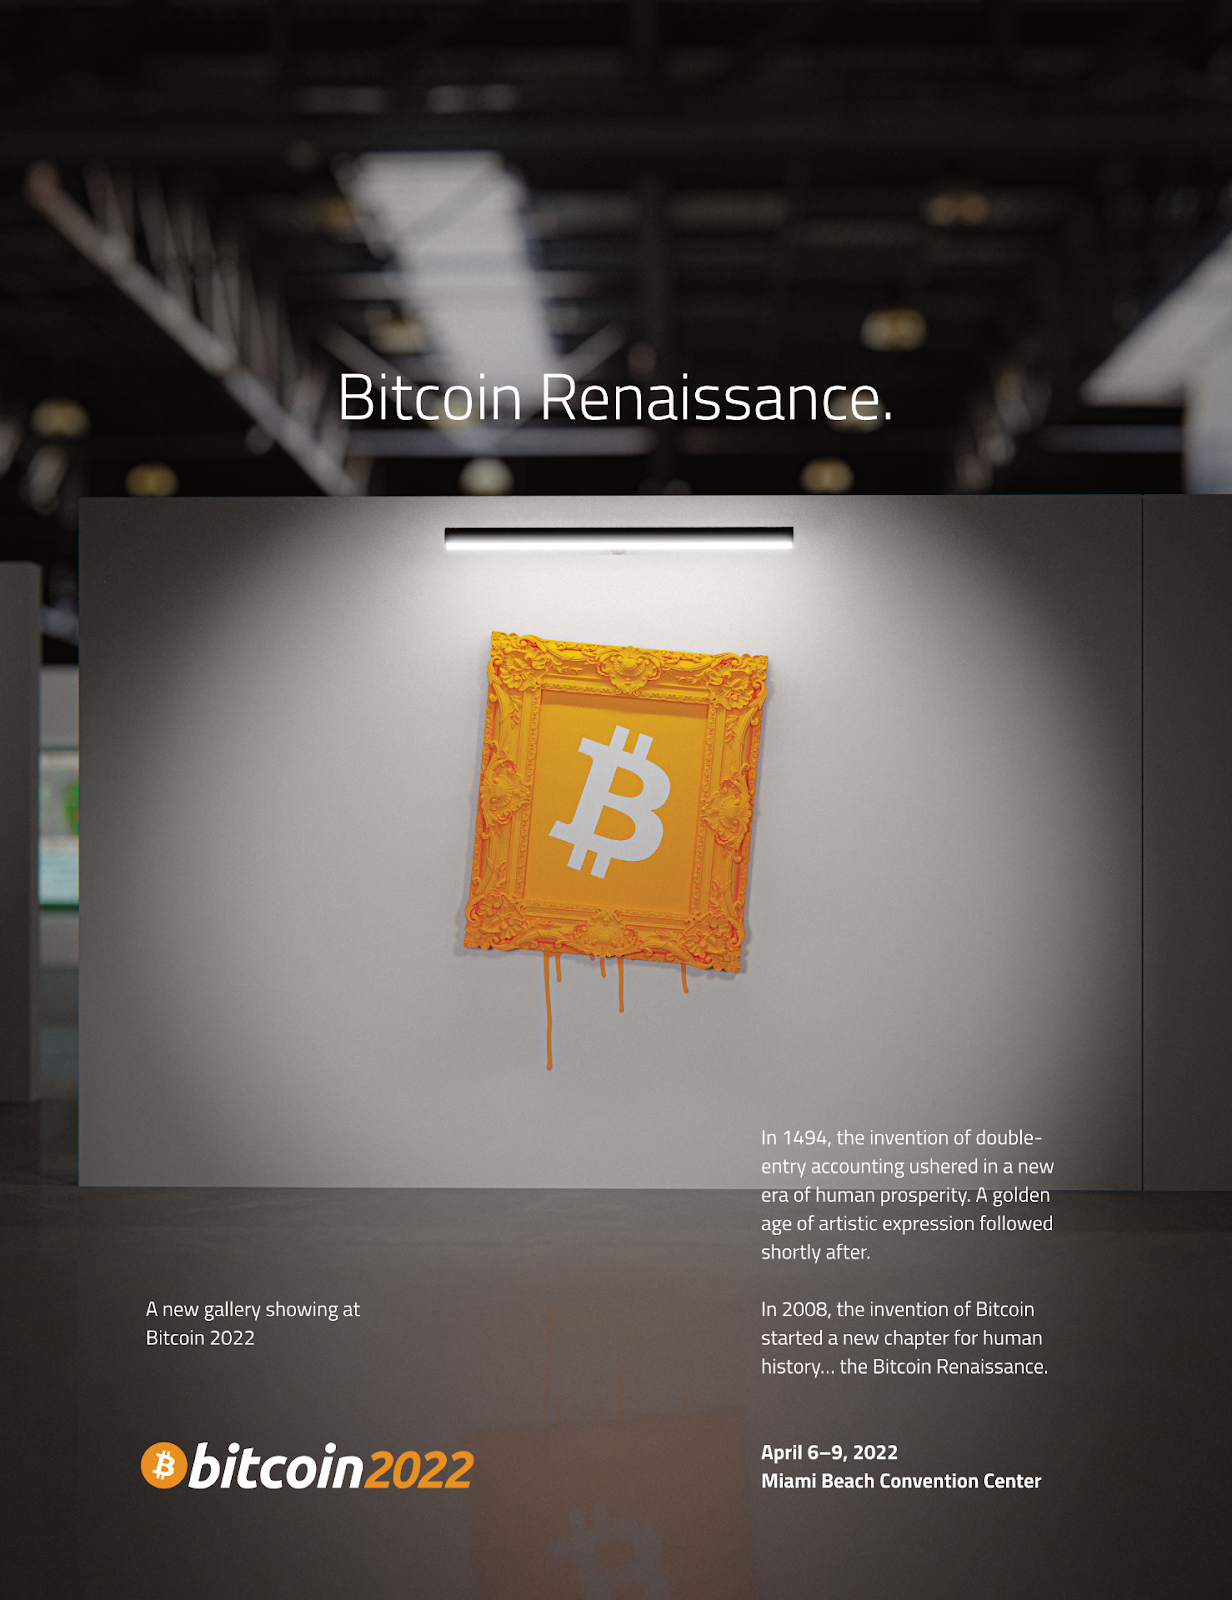 Bitcoin Art Gallery for the conference in Miami.